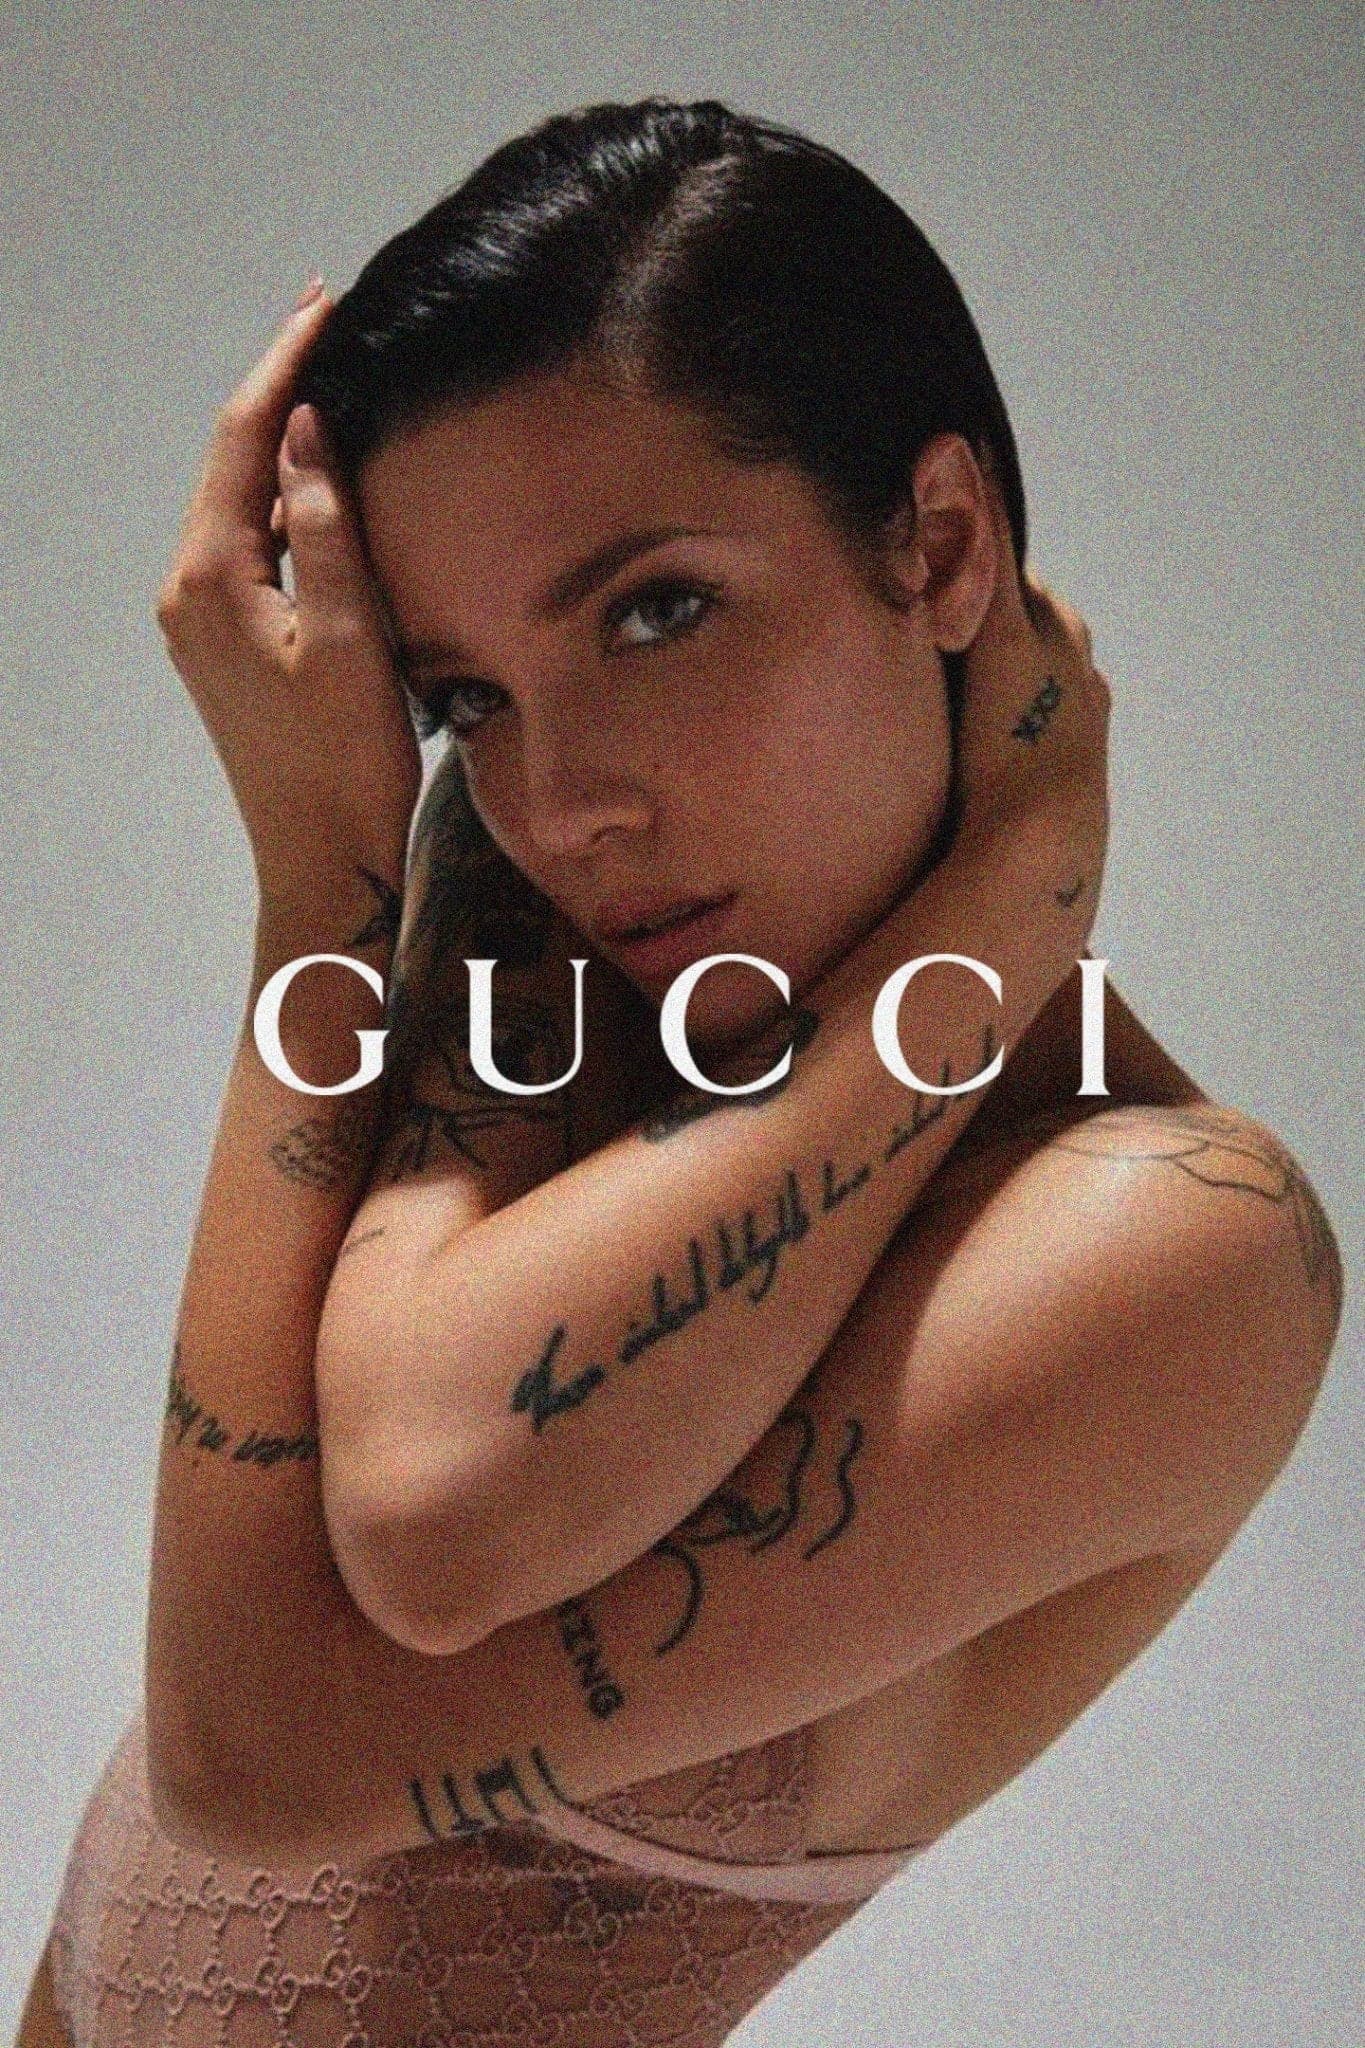 Halsey ‘Gucci’ Poster - Posters Plug